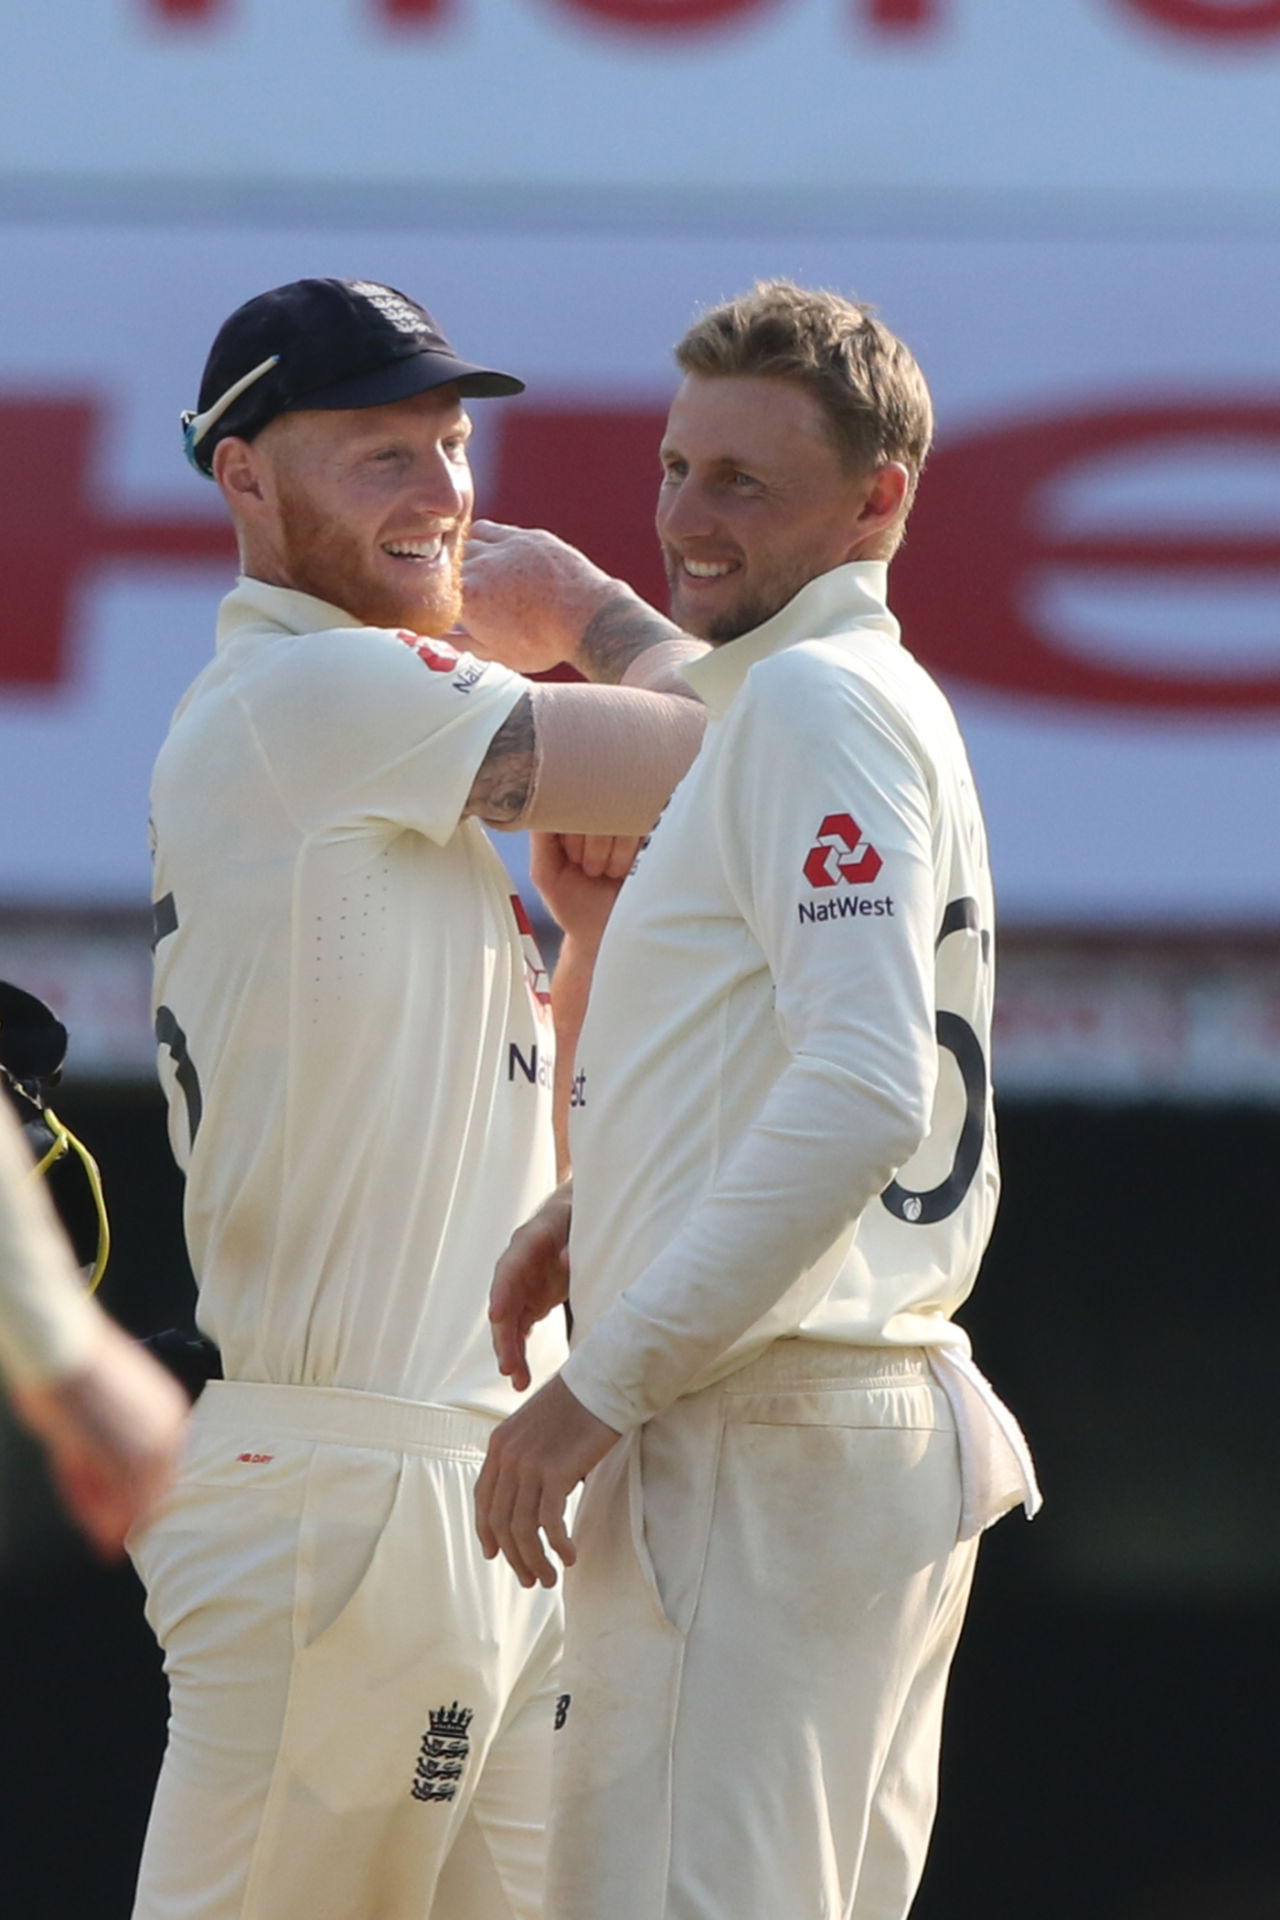 Joe Root did his fair share of bowling on day one and was rewarded with the wicket of R Ashwin, India vs England, 2nd Test, Chennai, 1st day, February 13, 2021